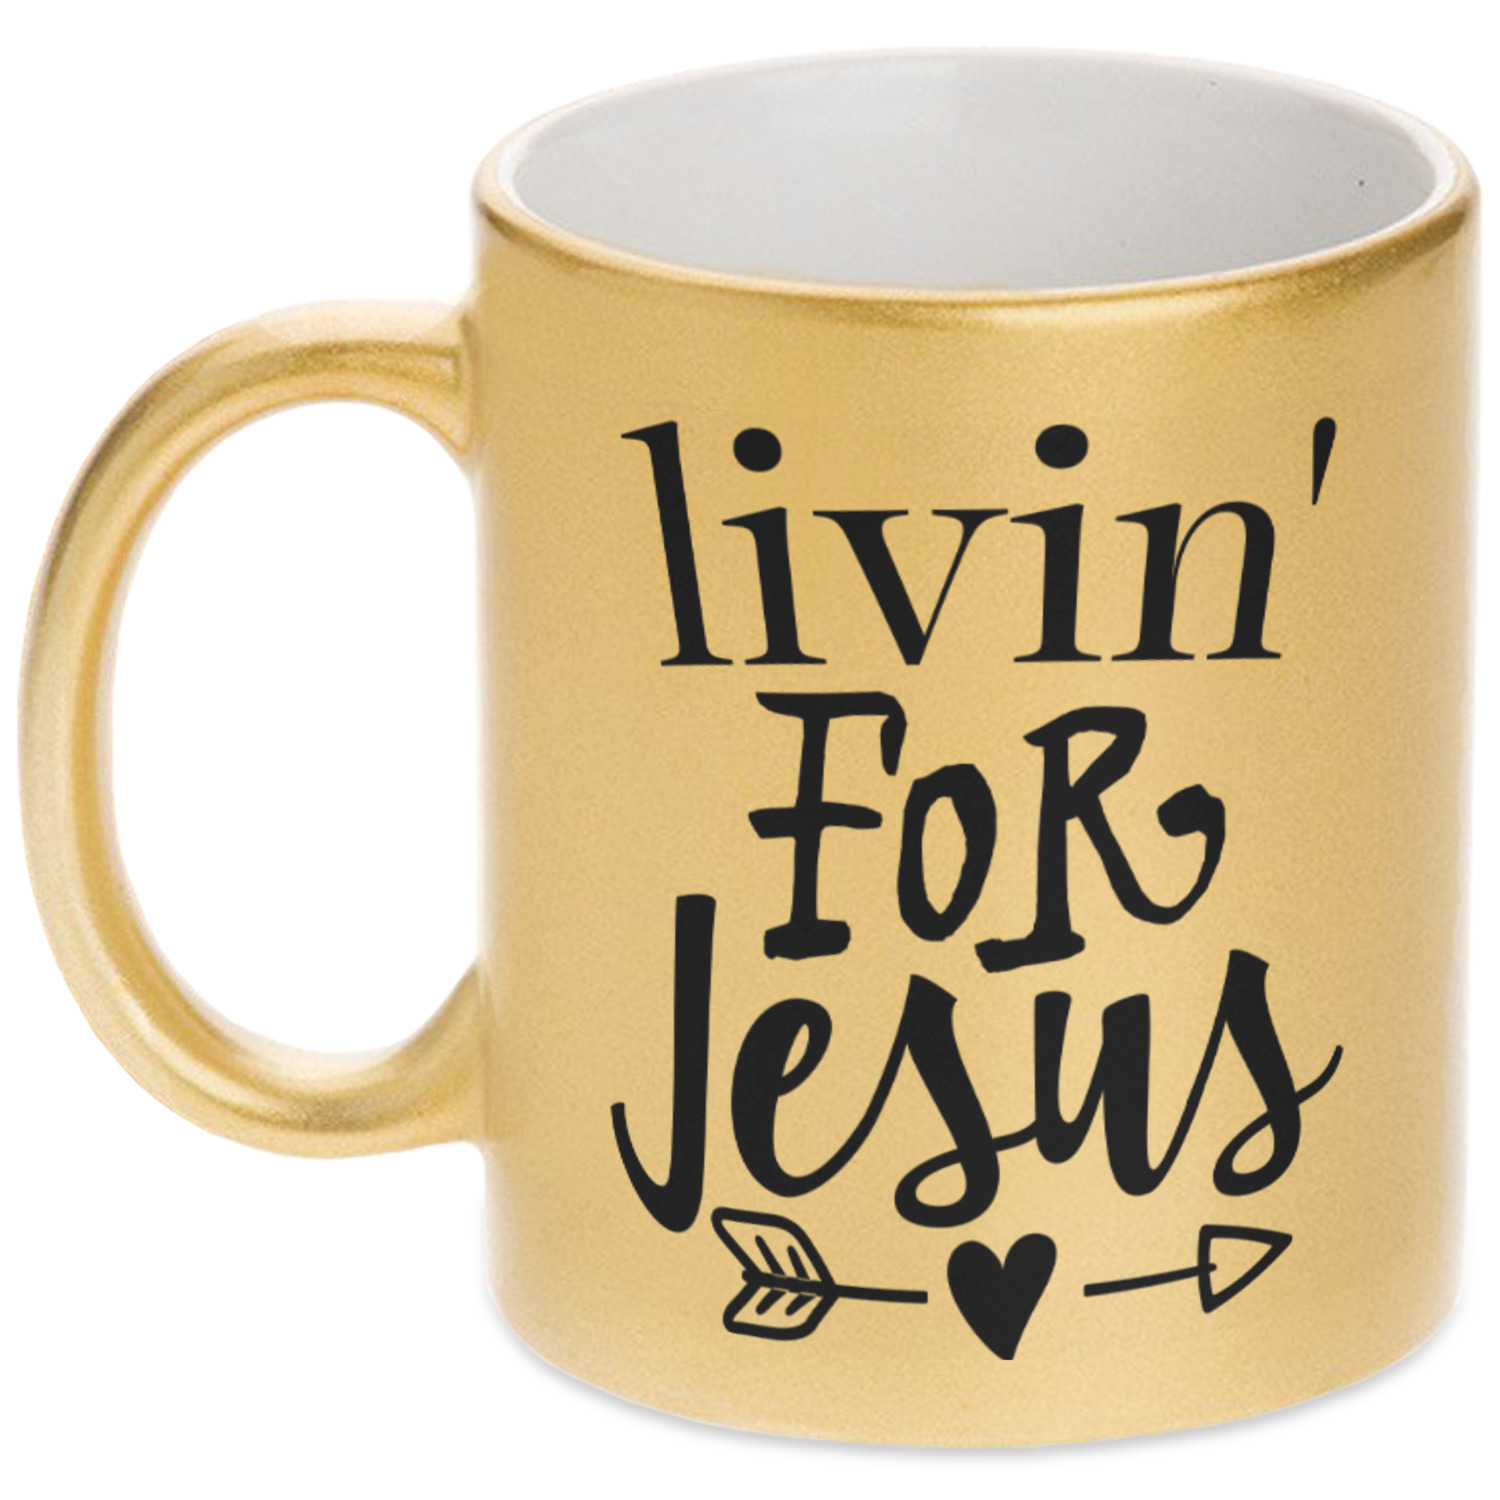 https://www.youcustomizeit.com/common/MAKE/1038318/Religious-Quotes-and-Sayings-Gold-Mug-Main.jpg?lm=1665684911